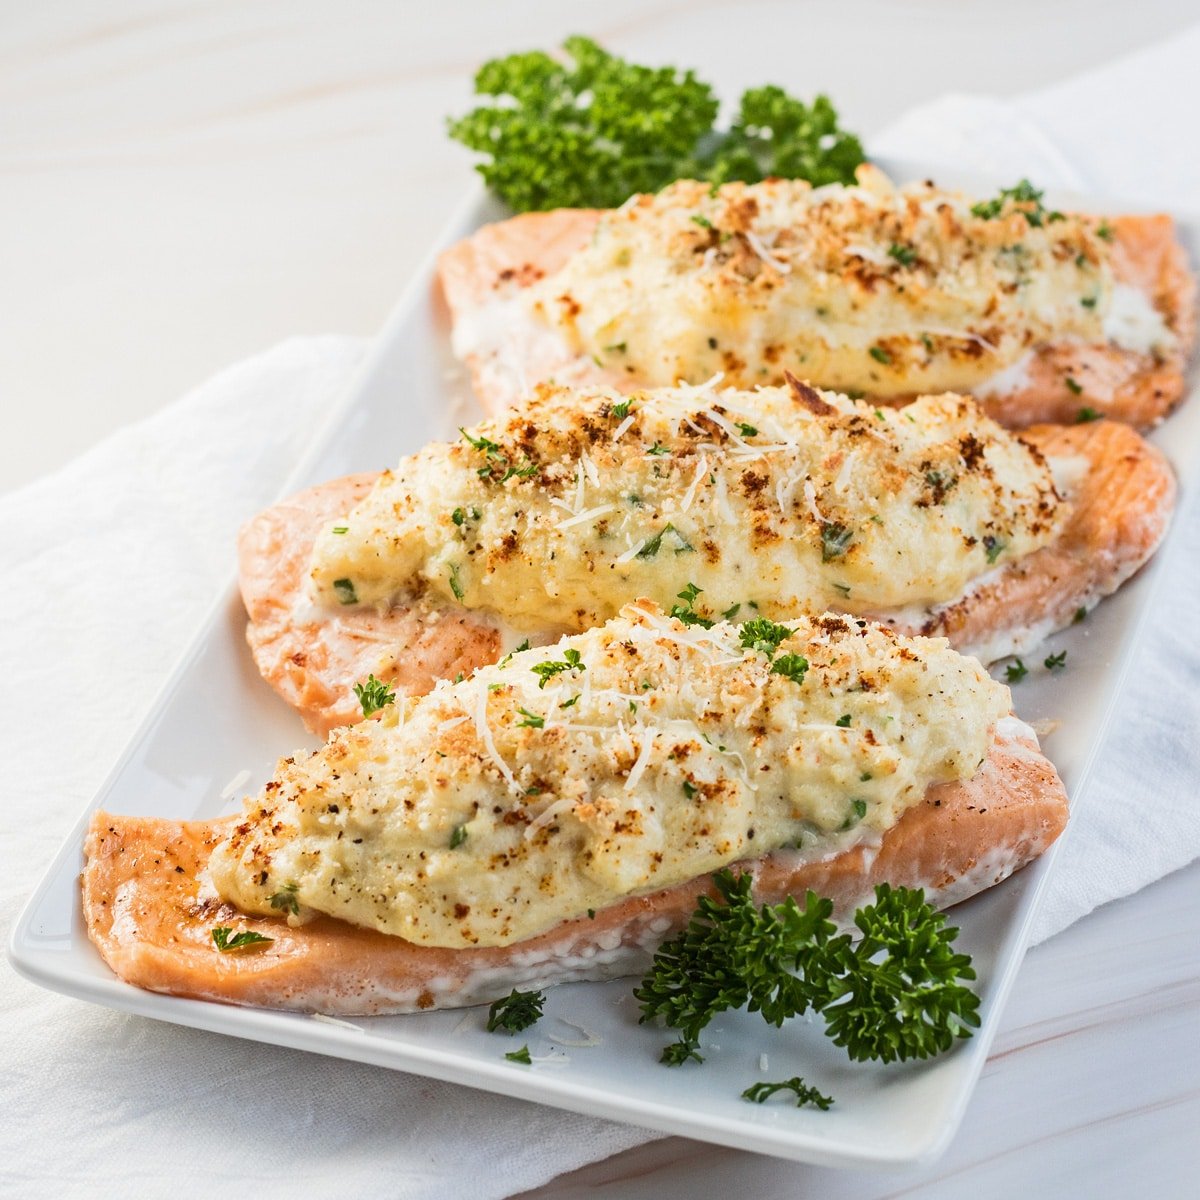 Crab stuffed salmon served on white plate garnished with fresh parsley.